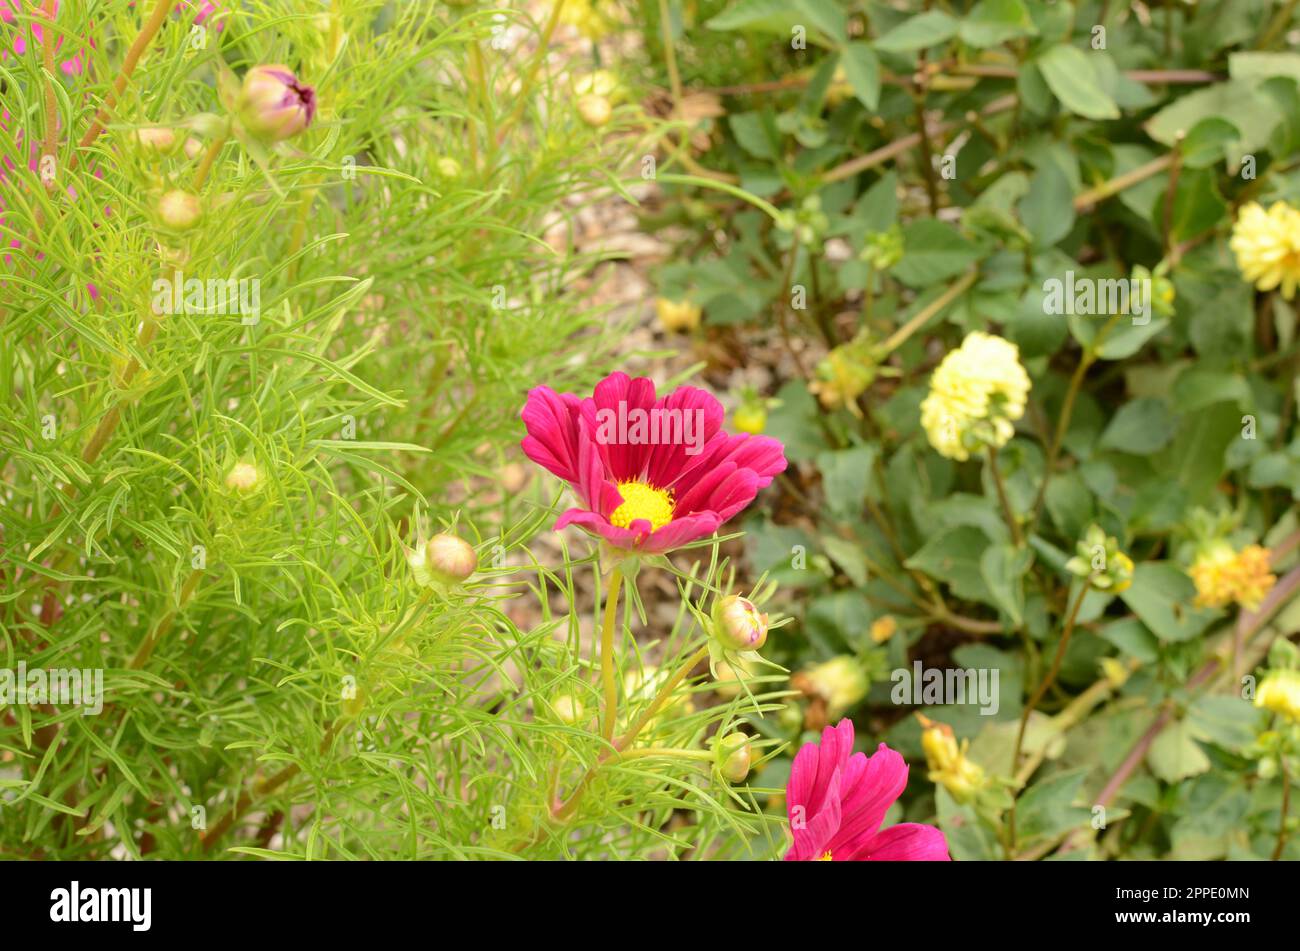 Pink Cosmos Flower. Stock Photo